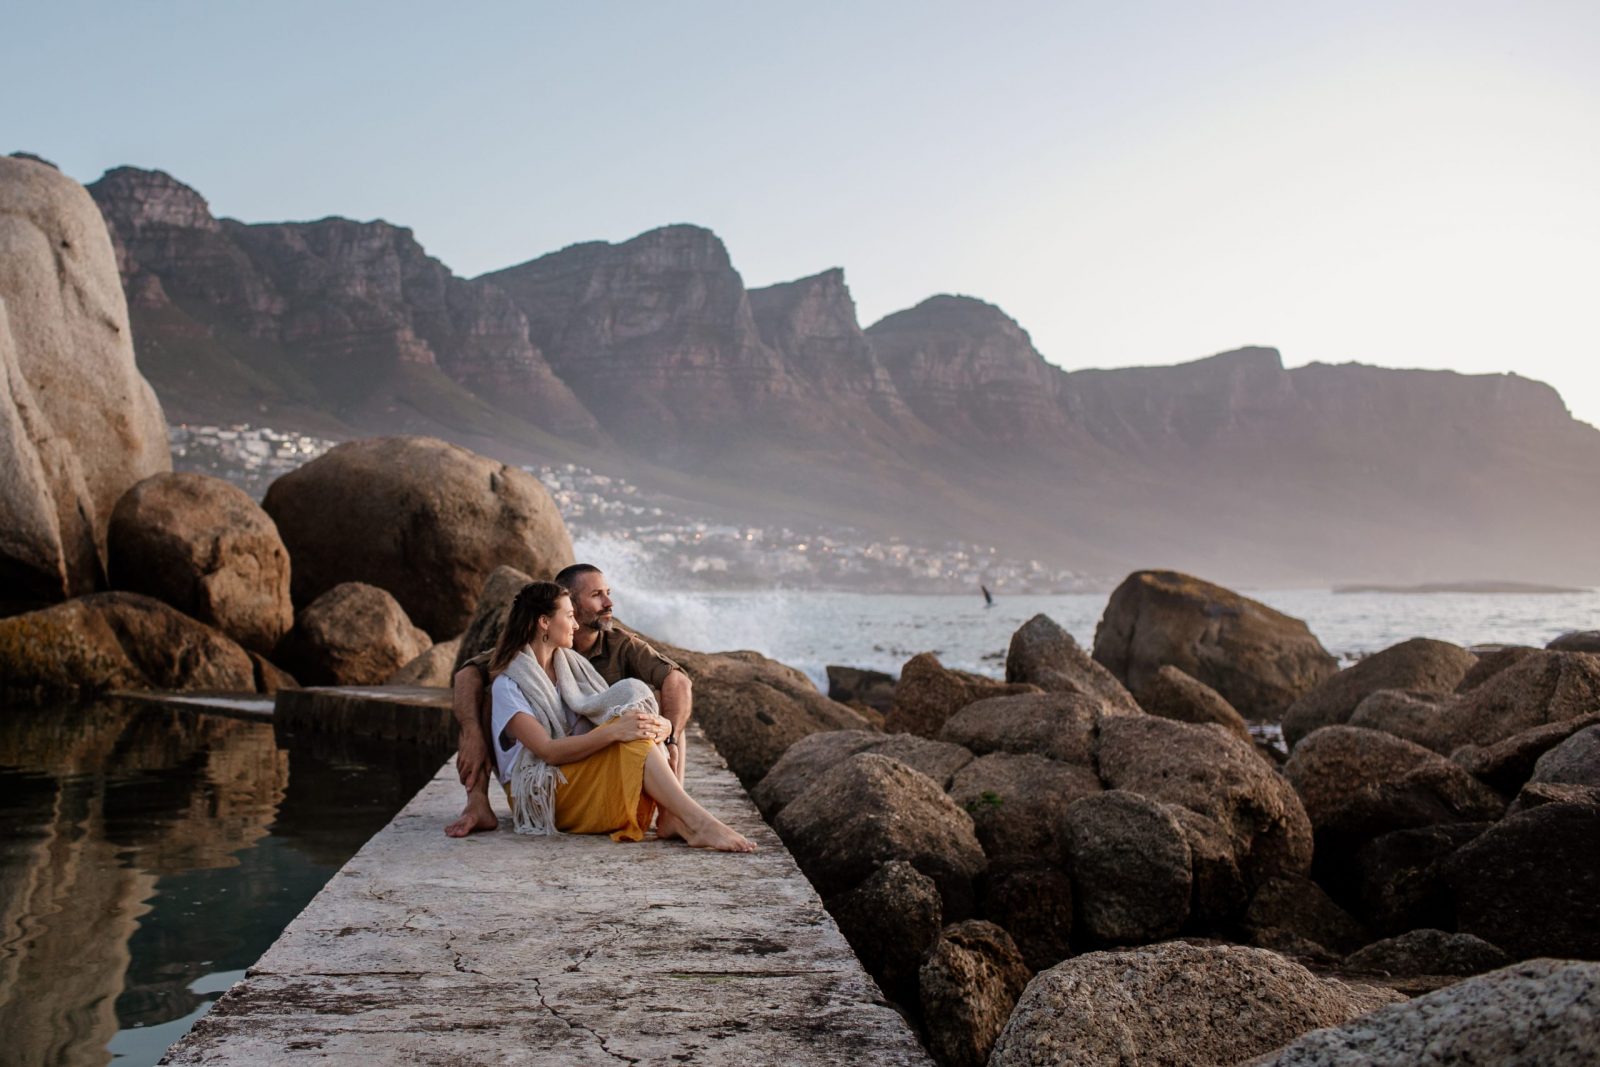 Our Photoshoot in Cape Town with Vacation Photographer from Localgrapher